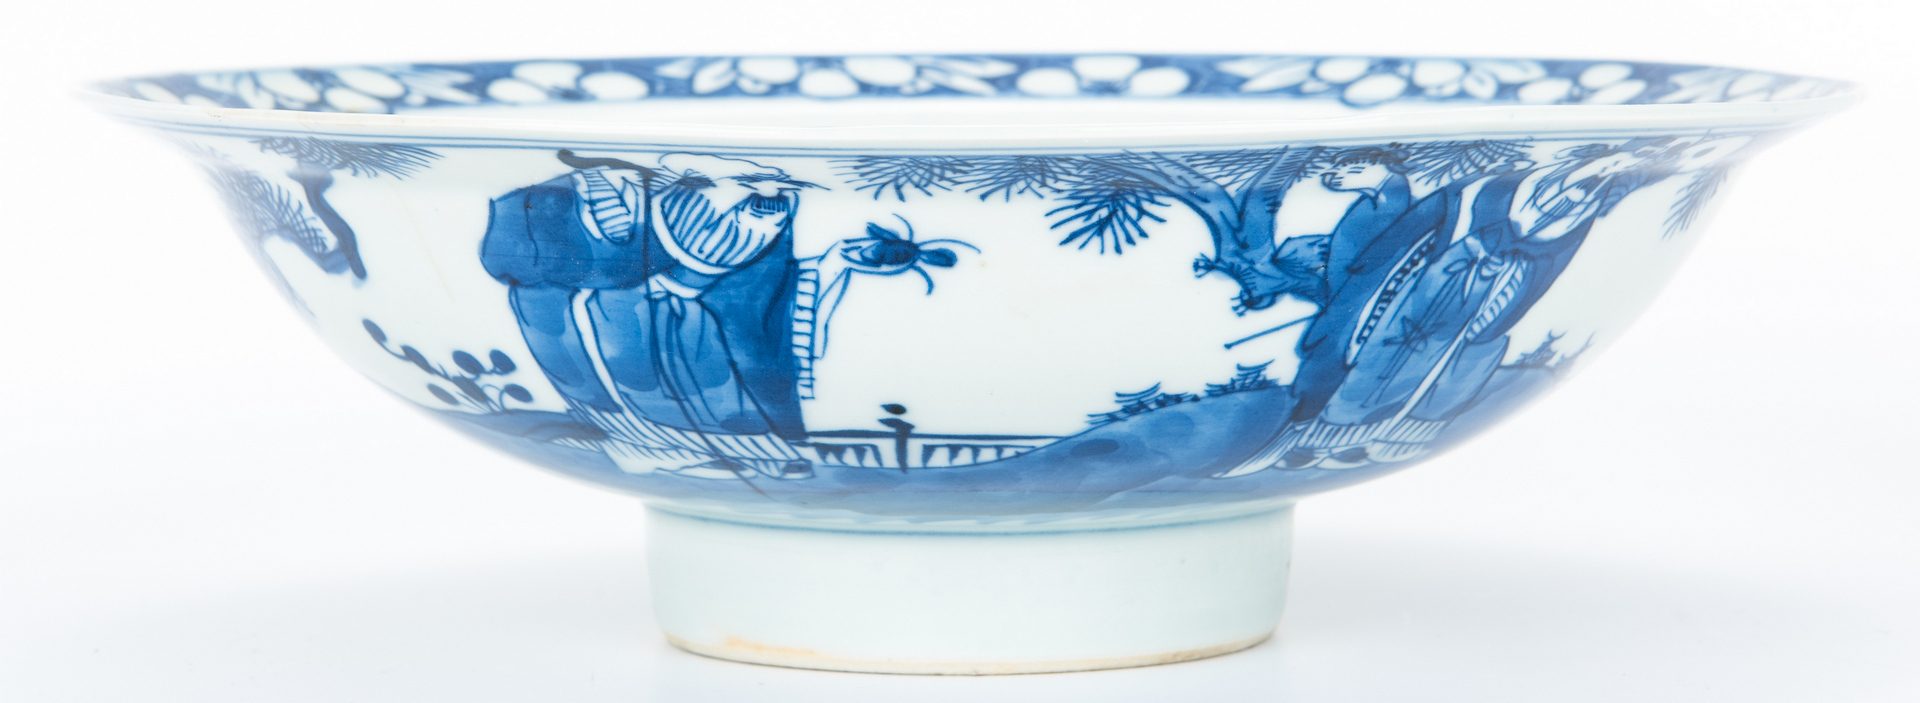 Lot 13: Asian Blue and White Bowls, Pedestal, and Jar, 5 items